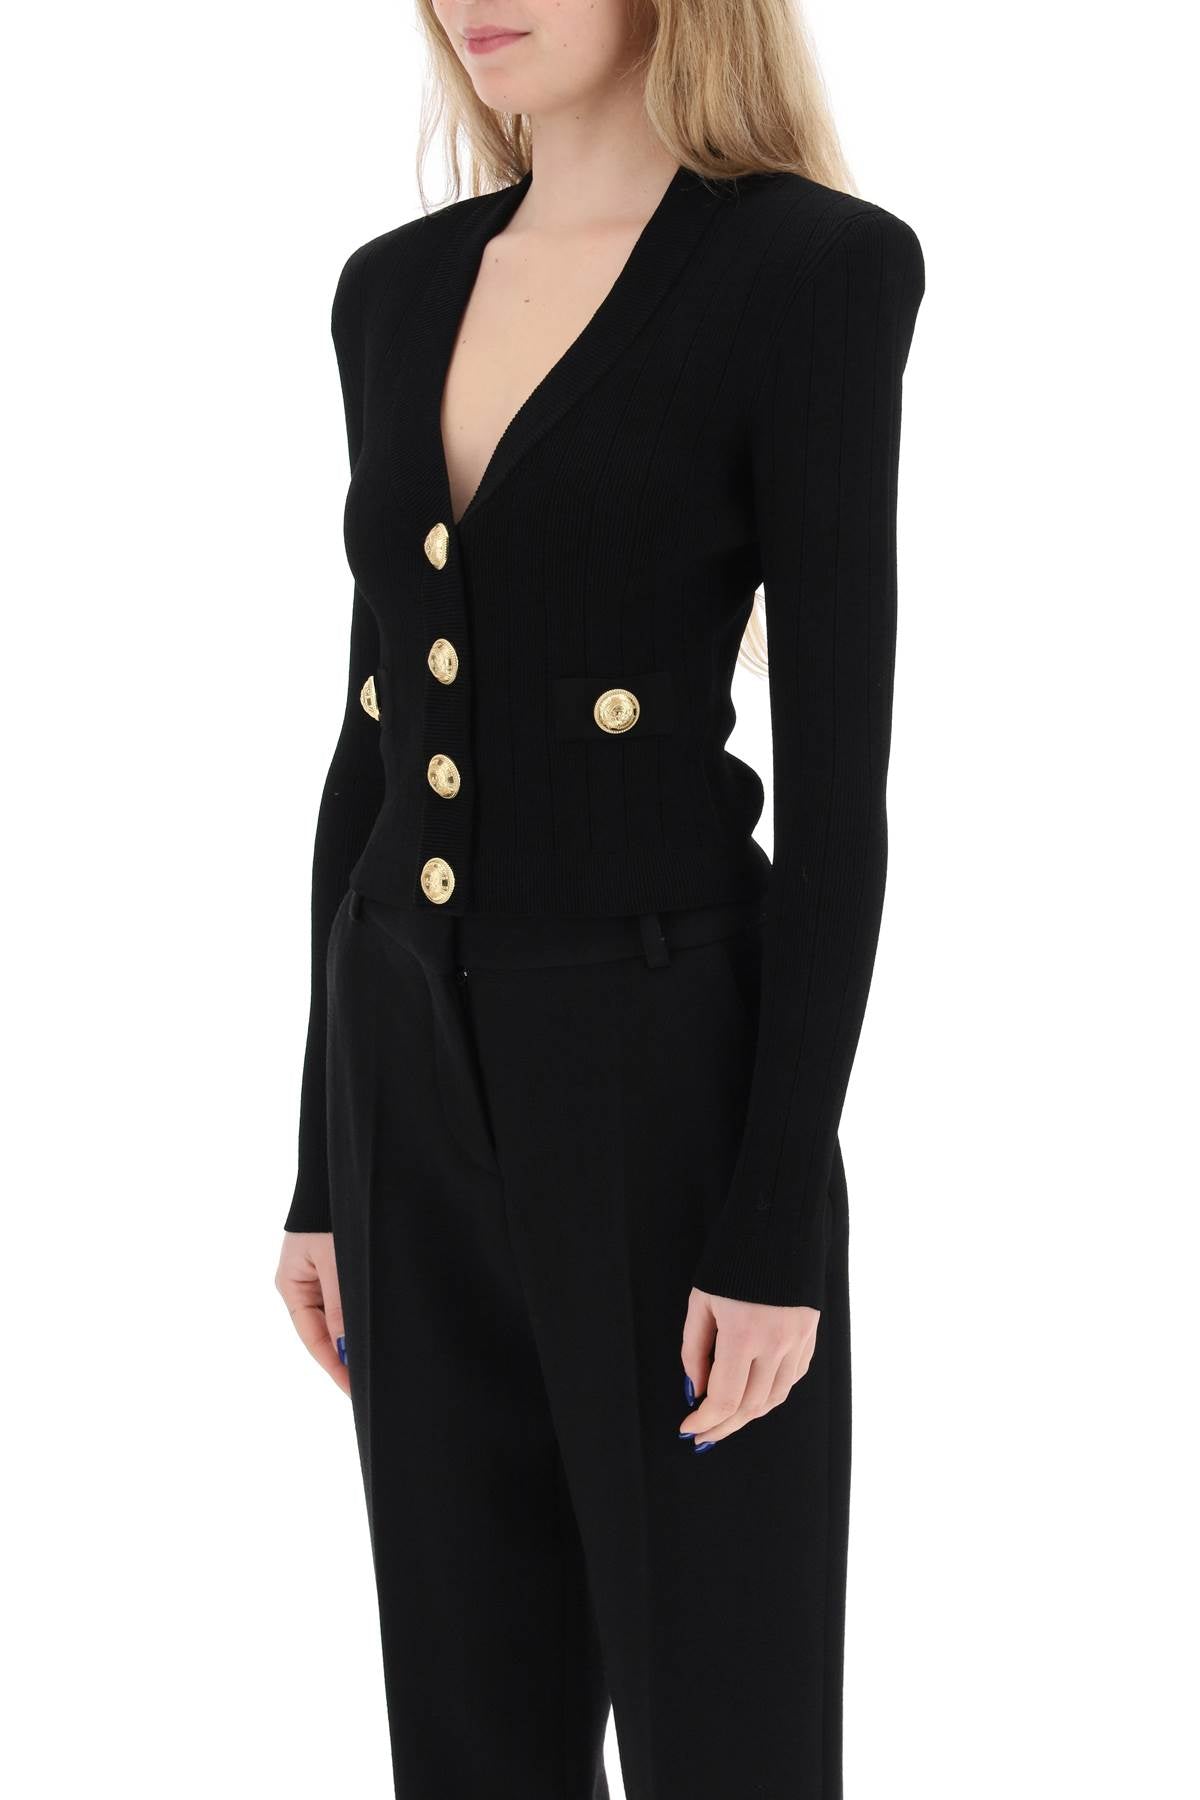 Balmain Cardigan With Padded Shoulders And Embossed Buttons   Black